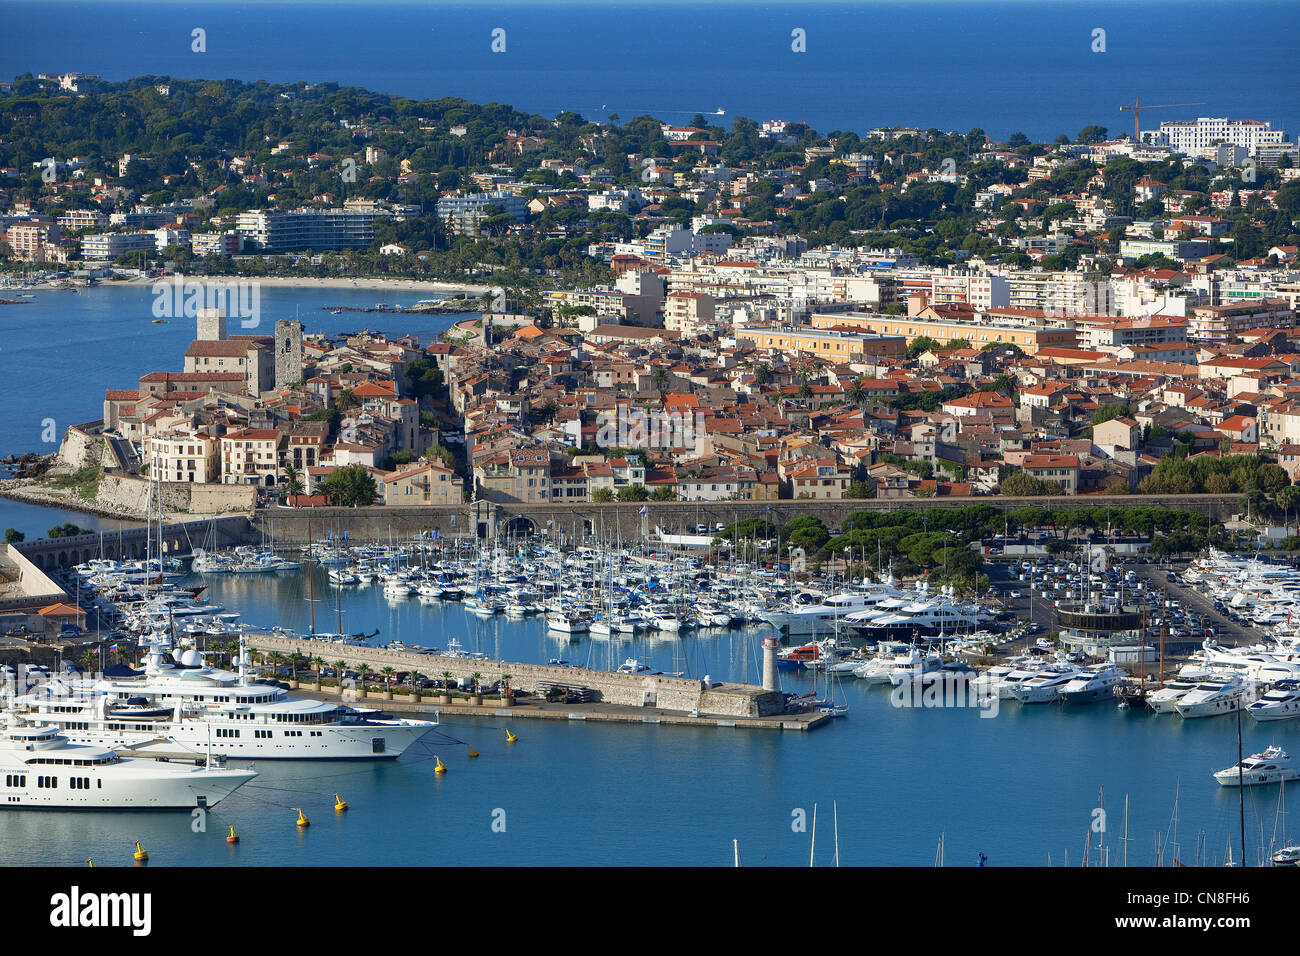 France, Alpes Maritimes, Antibes, Port Vauban in the foreground, the old town and Cap d'Antibes in the background (aerial view) Stock Photo